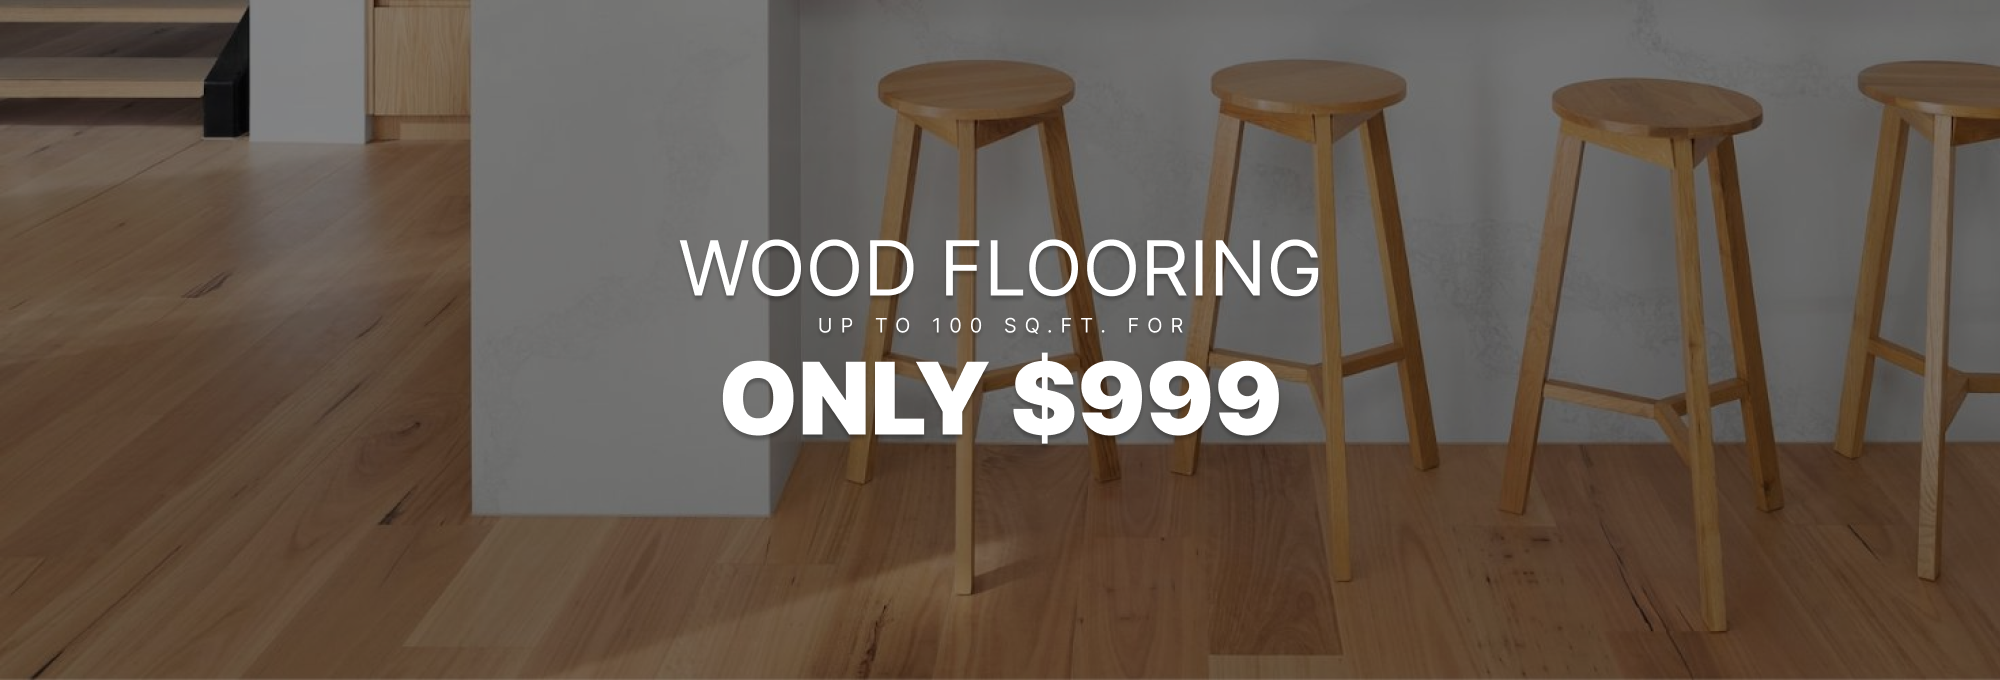 Wood flooring u to 100 square feet for only $999!